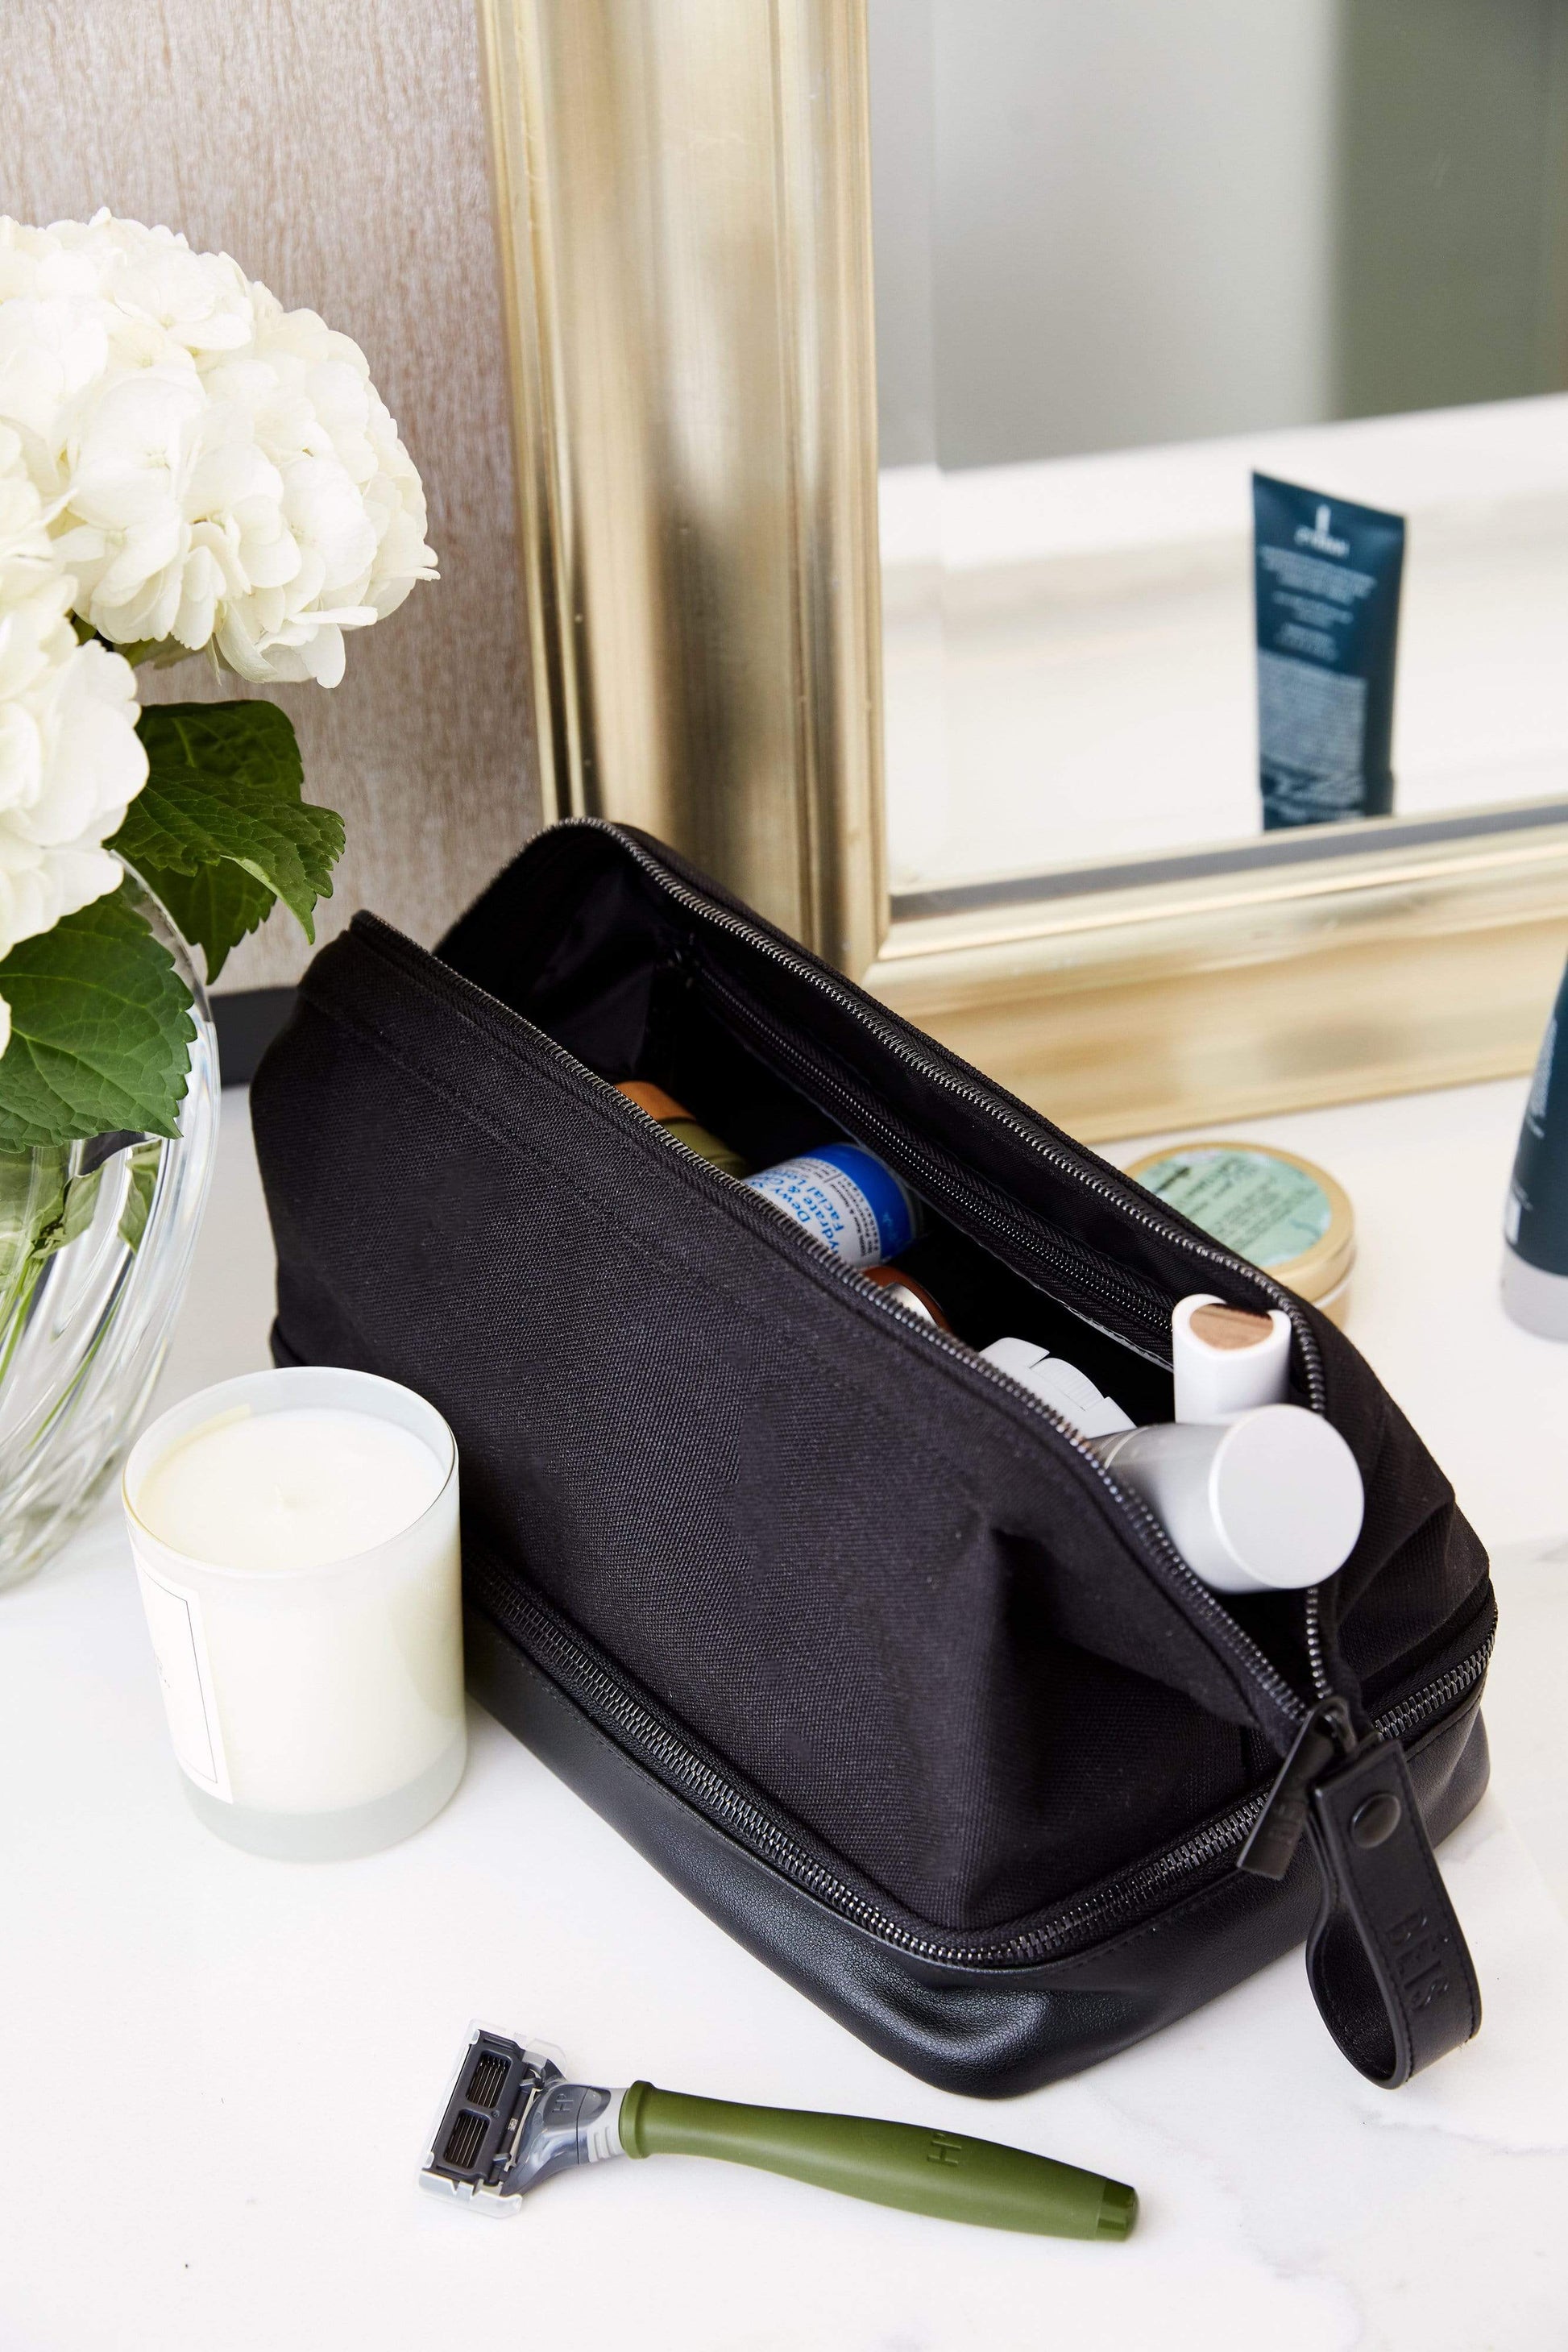 BEIS by Shay Mitchell | The Dopp Kit (On a Counter)